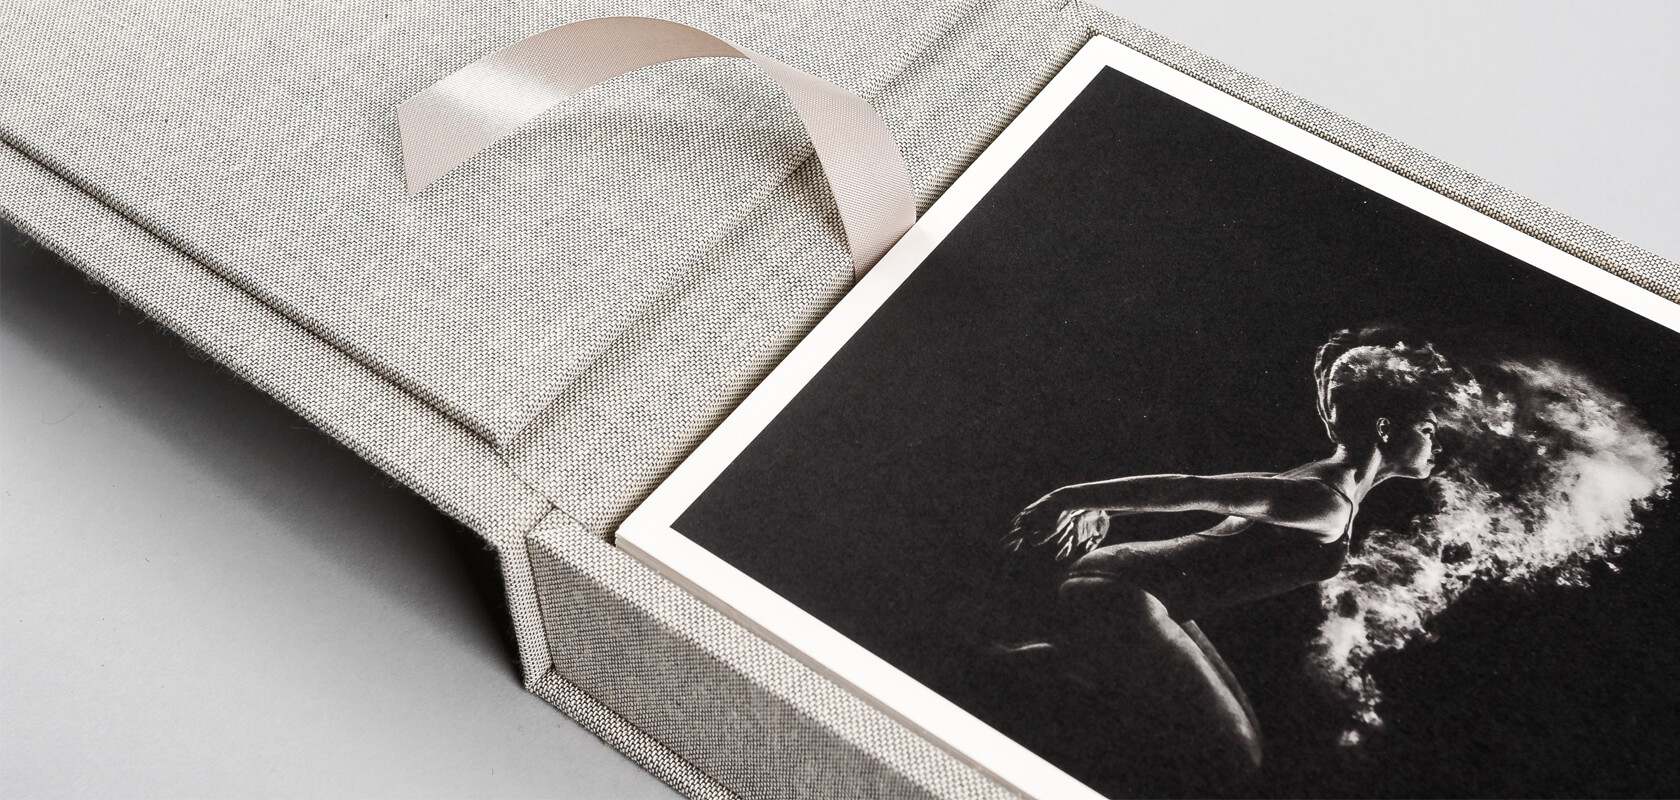 Box for Prints - Hand made with attention to the smallest detail.